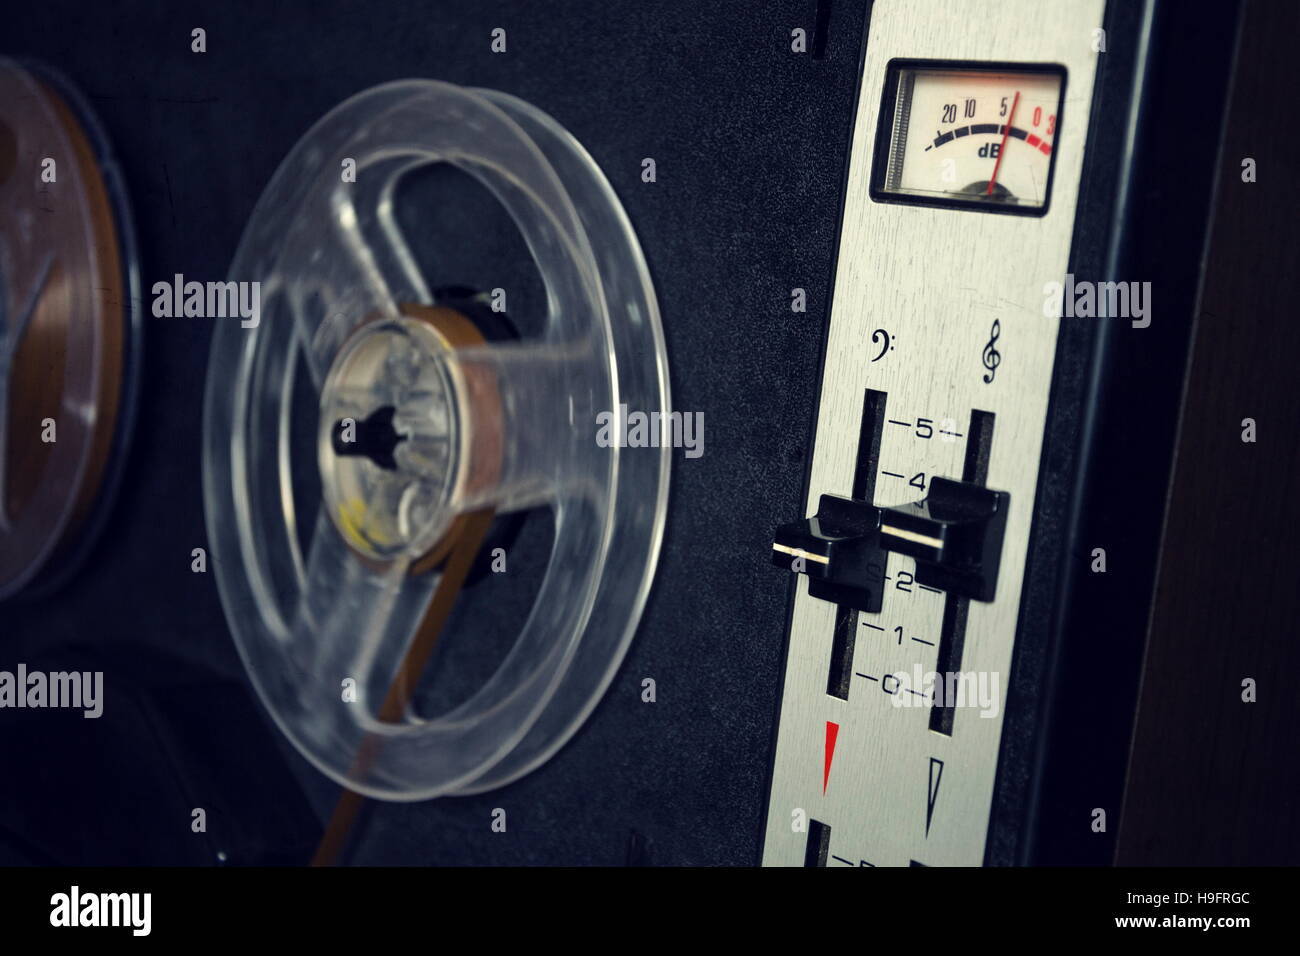 Filtered vintage picture of reel-to-reel audio recorder Stock Photo